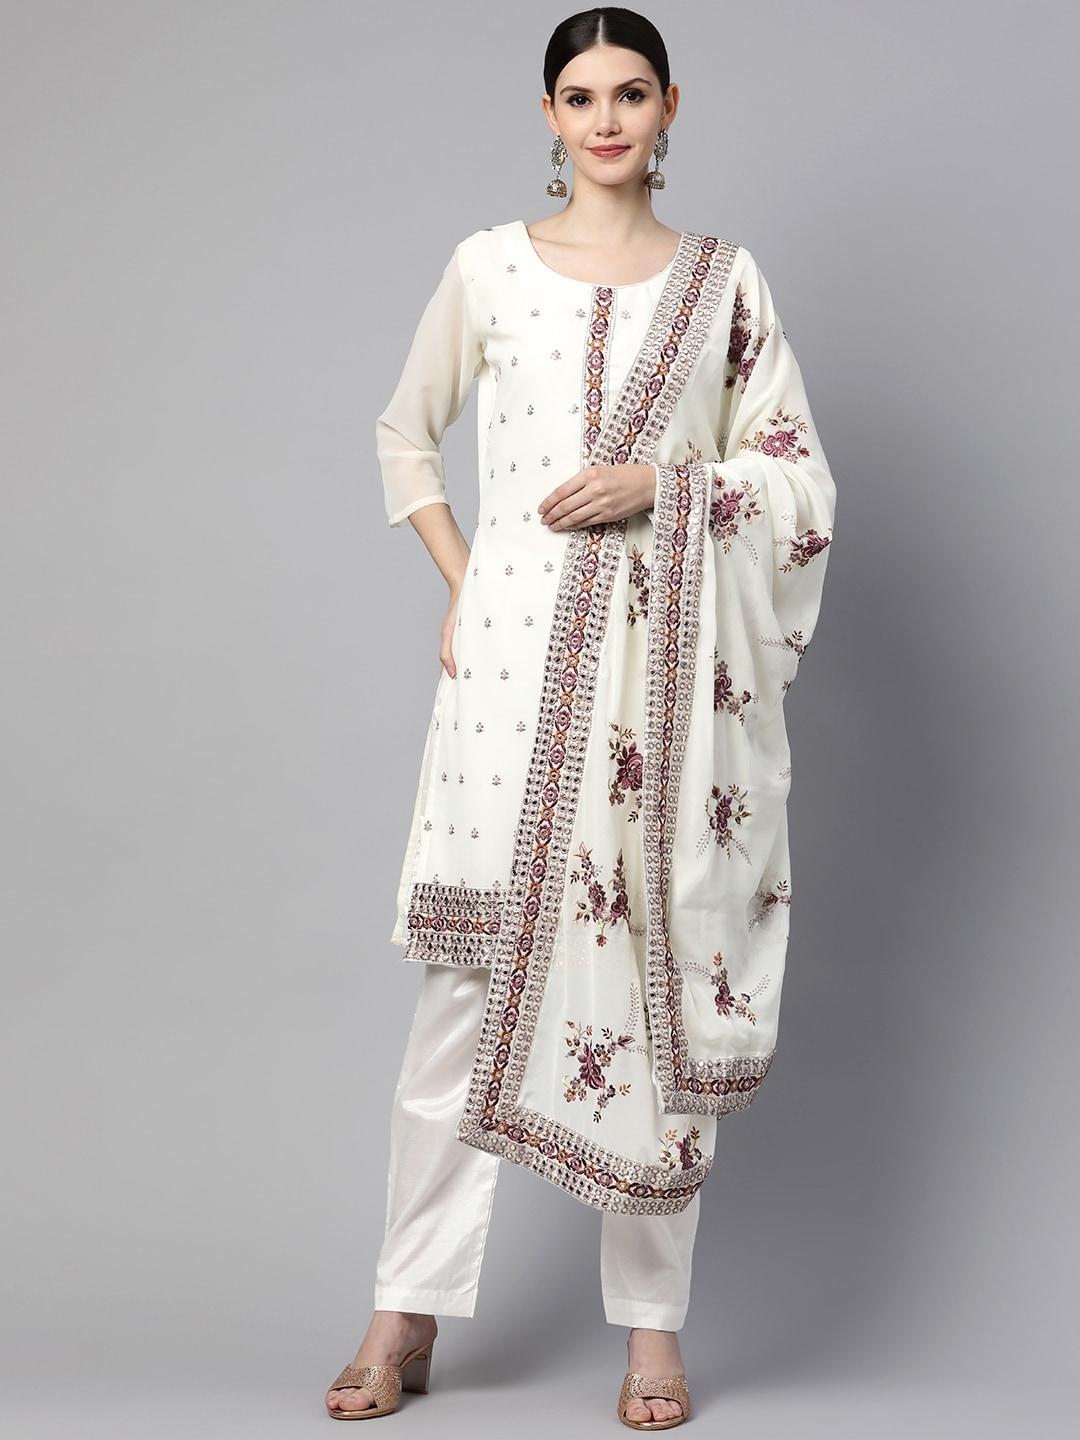 Readiprint Fashions Off White Embroidered Semi-Stitched Dress Material